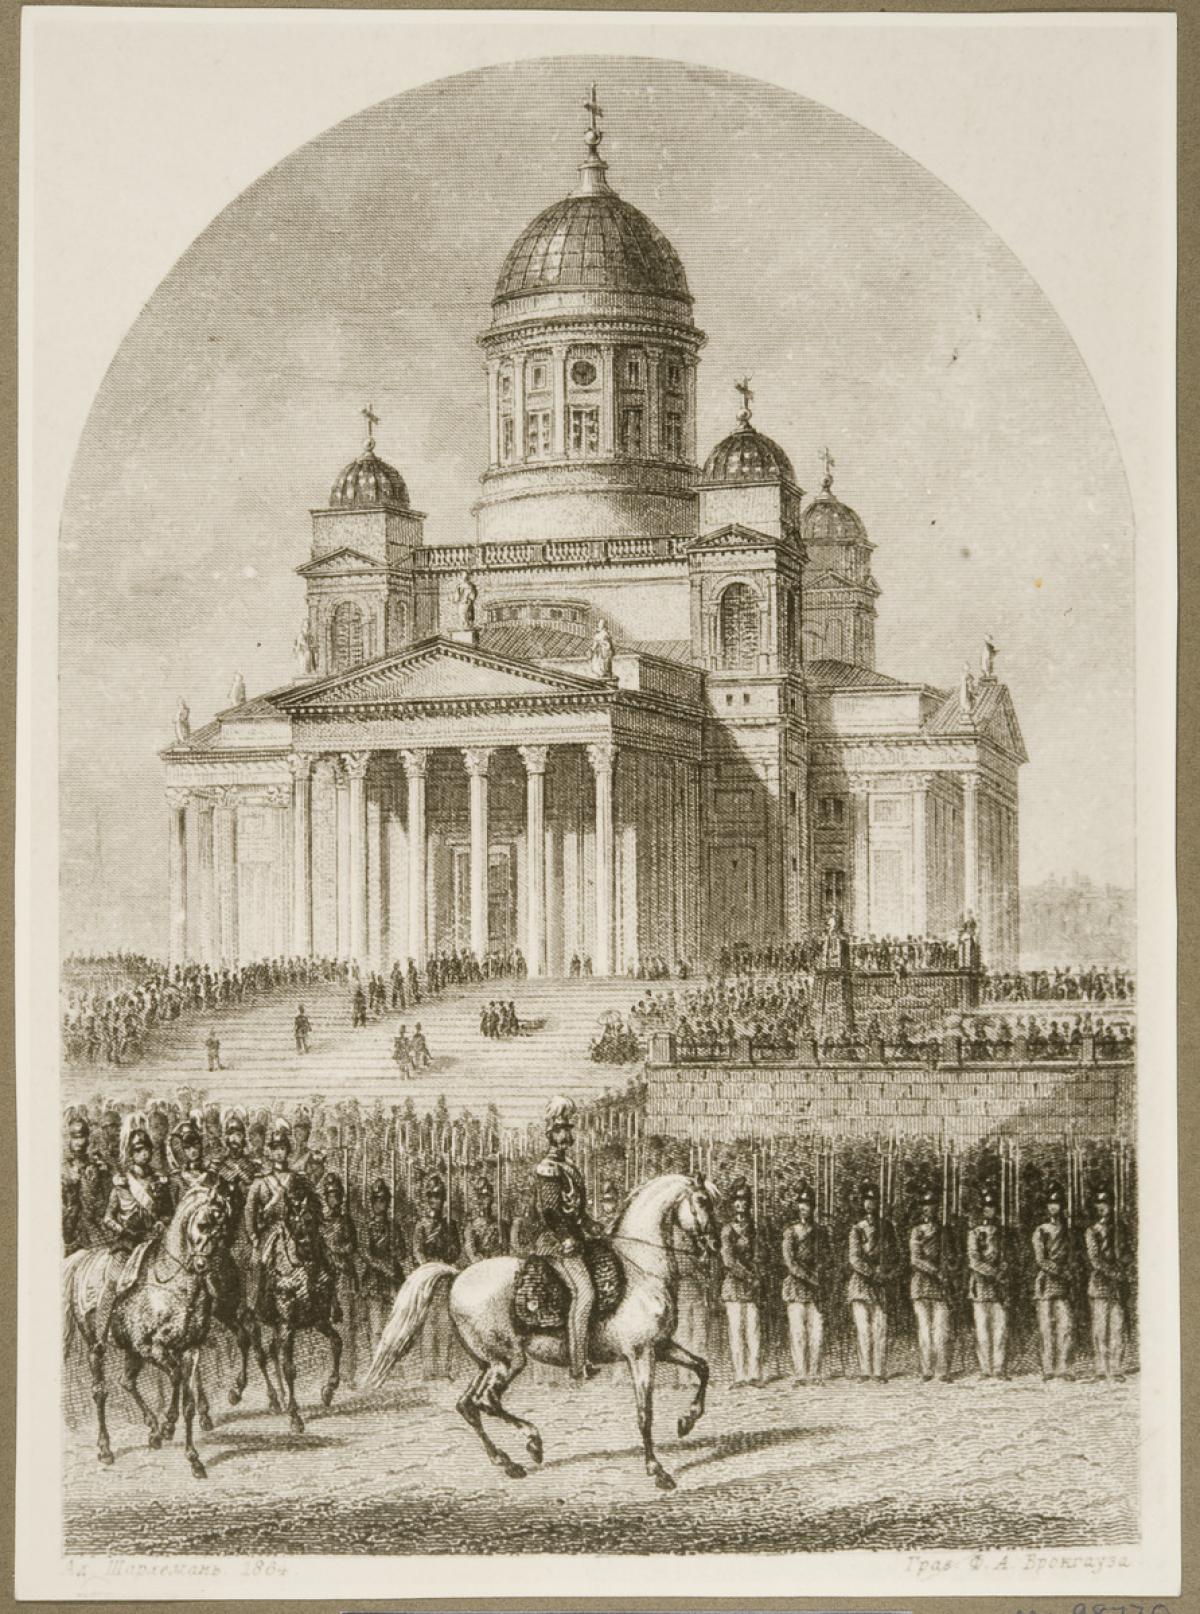 A man on horseback and soldiers standing on a square in front of a large church